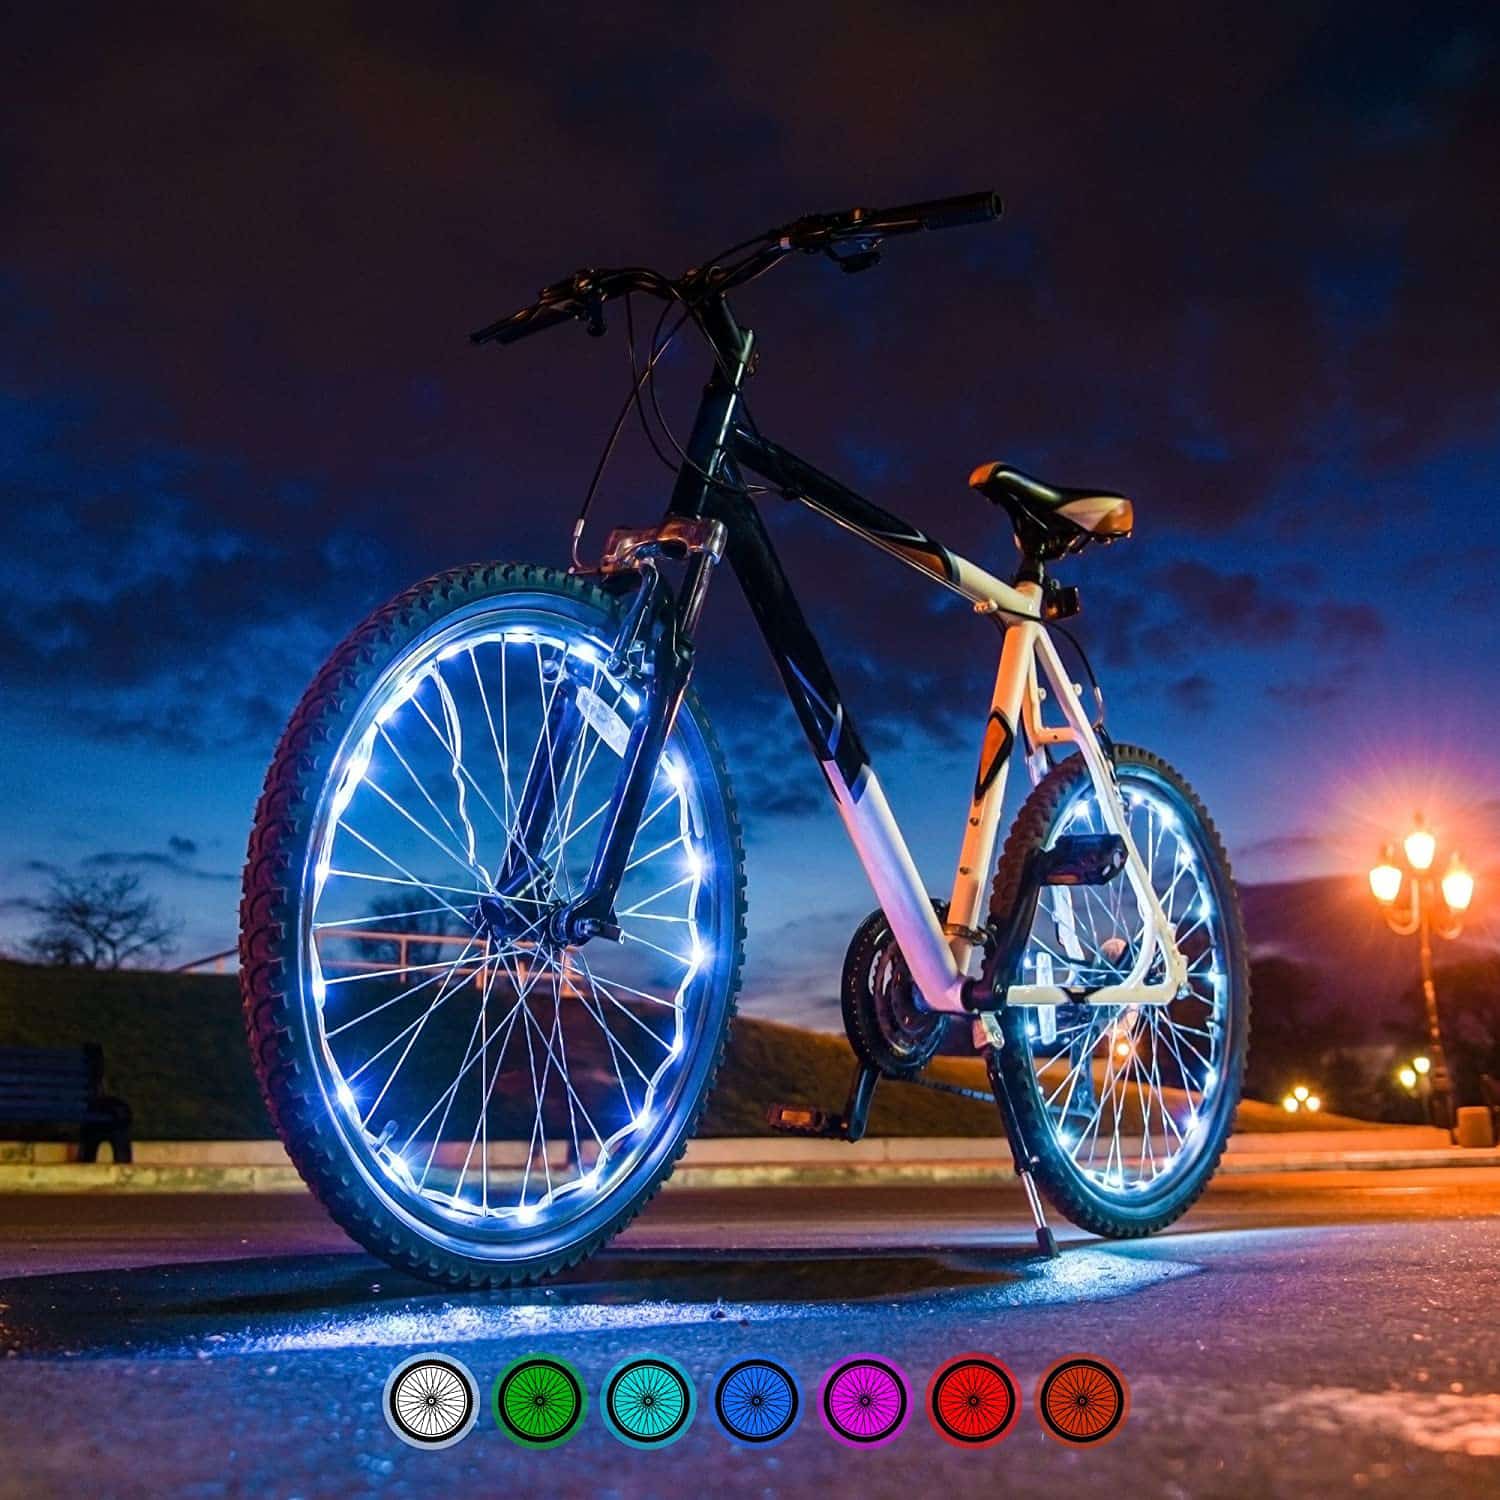 Top 10 Best LED Bike Wheel Lights in 2020 Reviews | Buying Guide